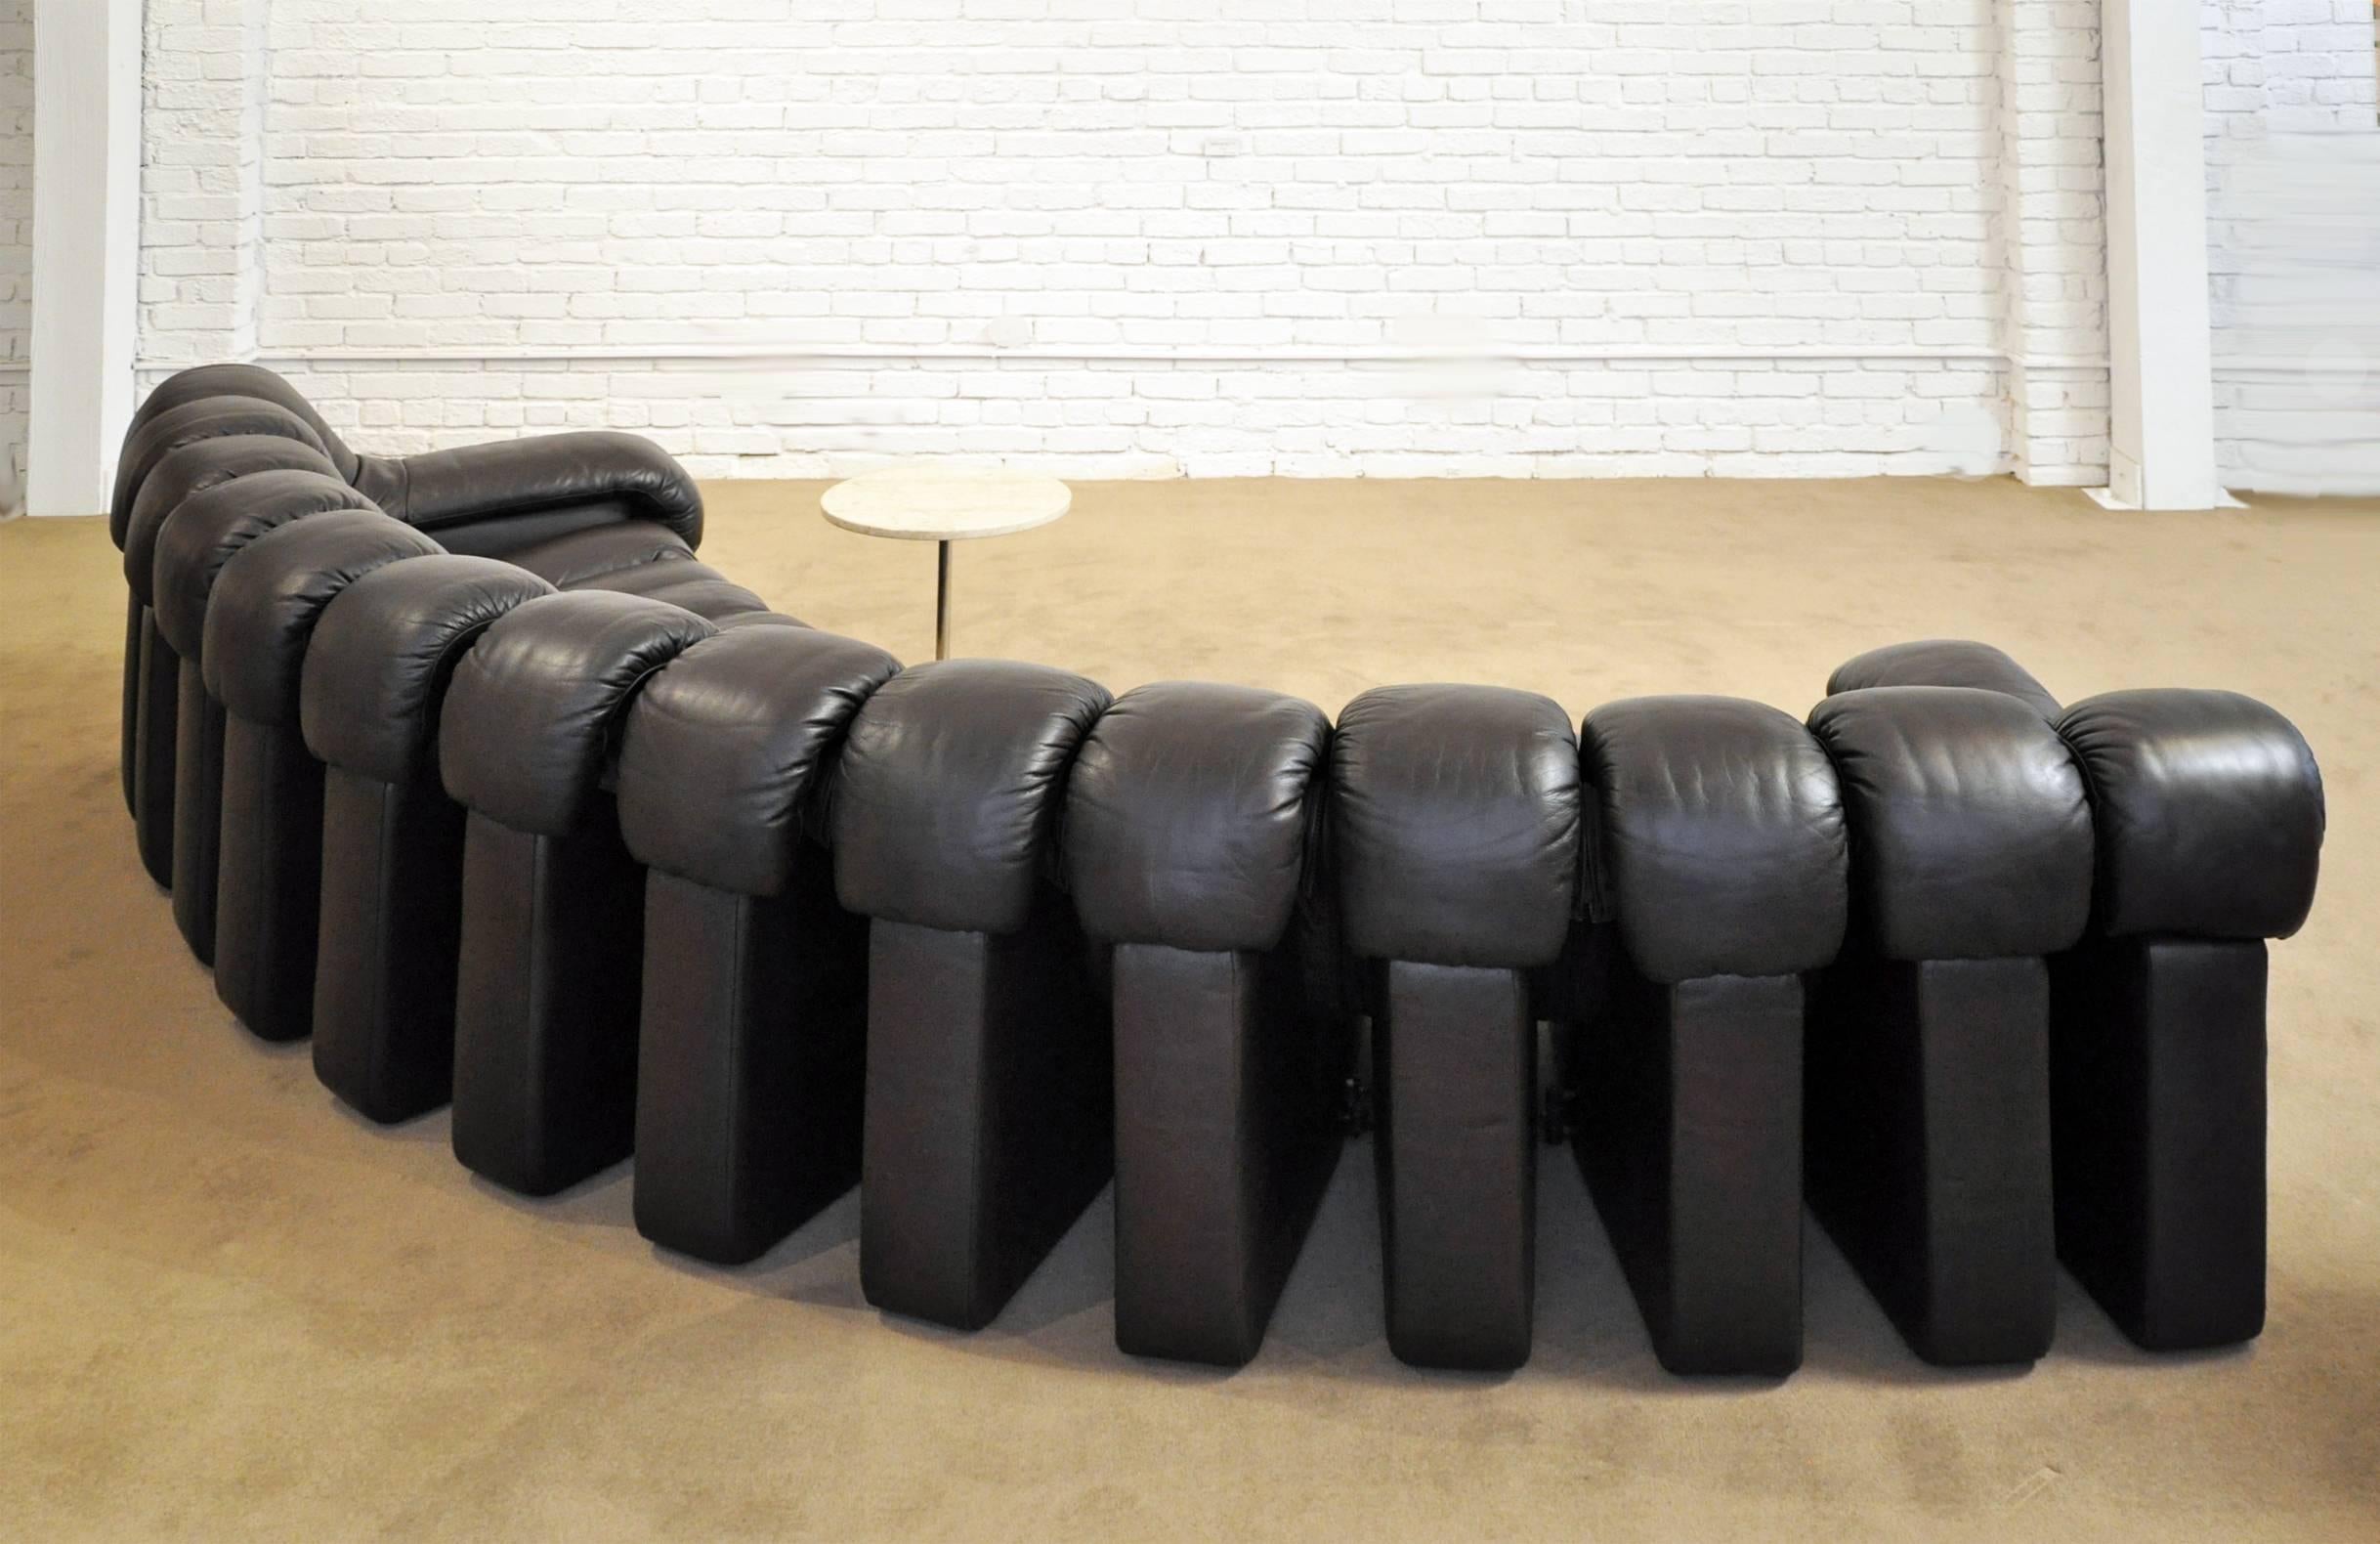 Designers: U. Bergere, E. Peduzzi Riva, H. Ulrich, K. Vogt designed this sofa for De Sede, Switzerland. Created in 1972, this sofa features 14 pieces that zip together. Completely covered in leather including the end pieces which have arms. This is